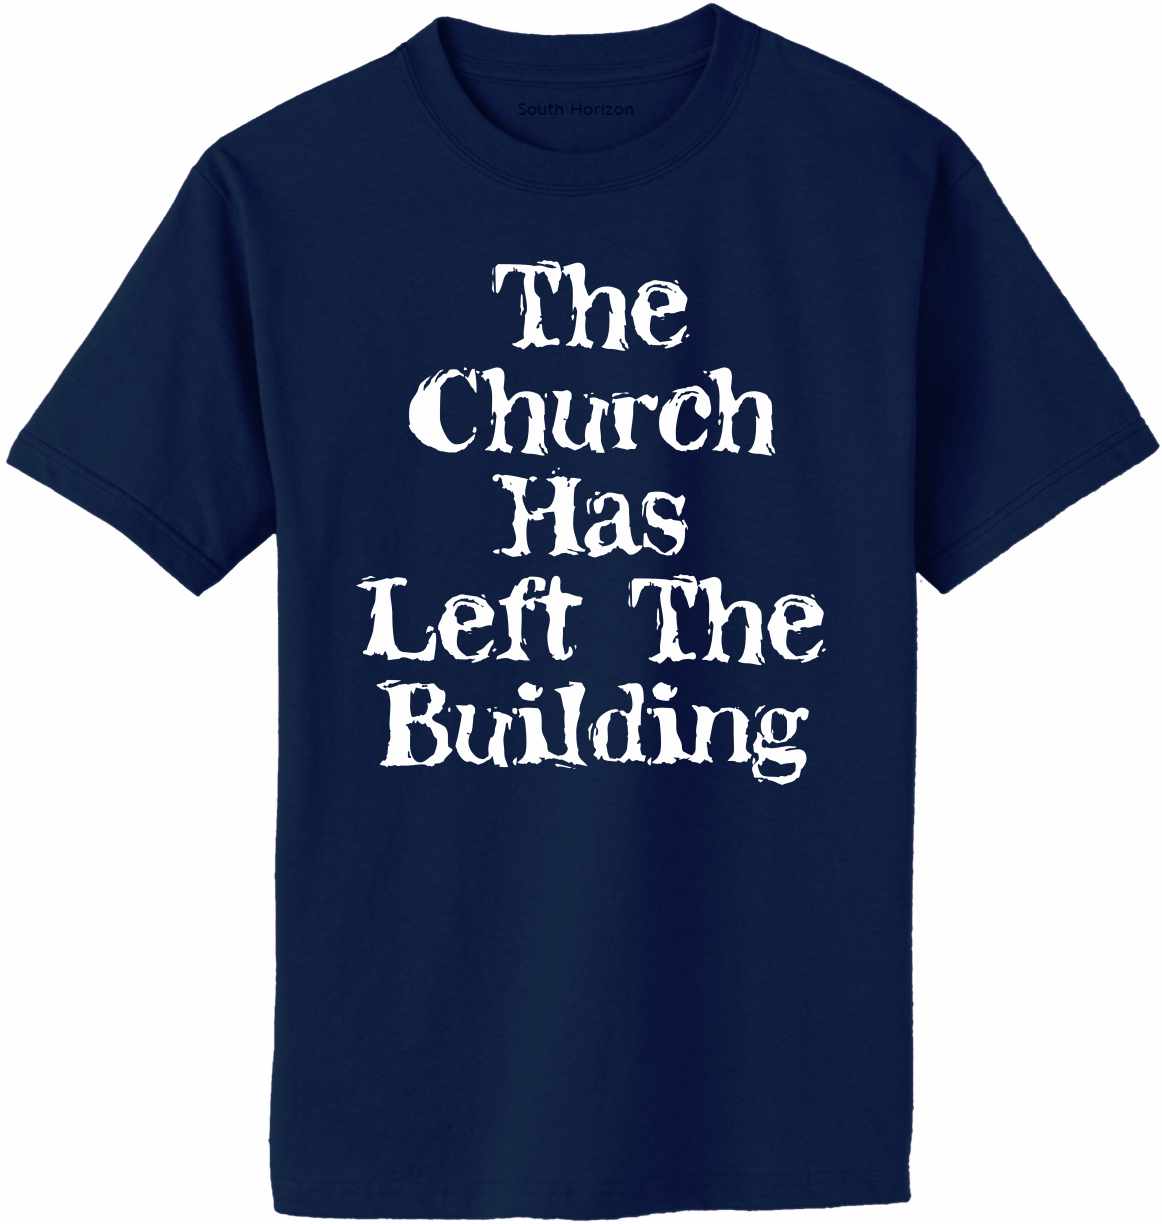 The Church Has Left The Building Adult T-Shirt (#1130-1)